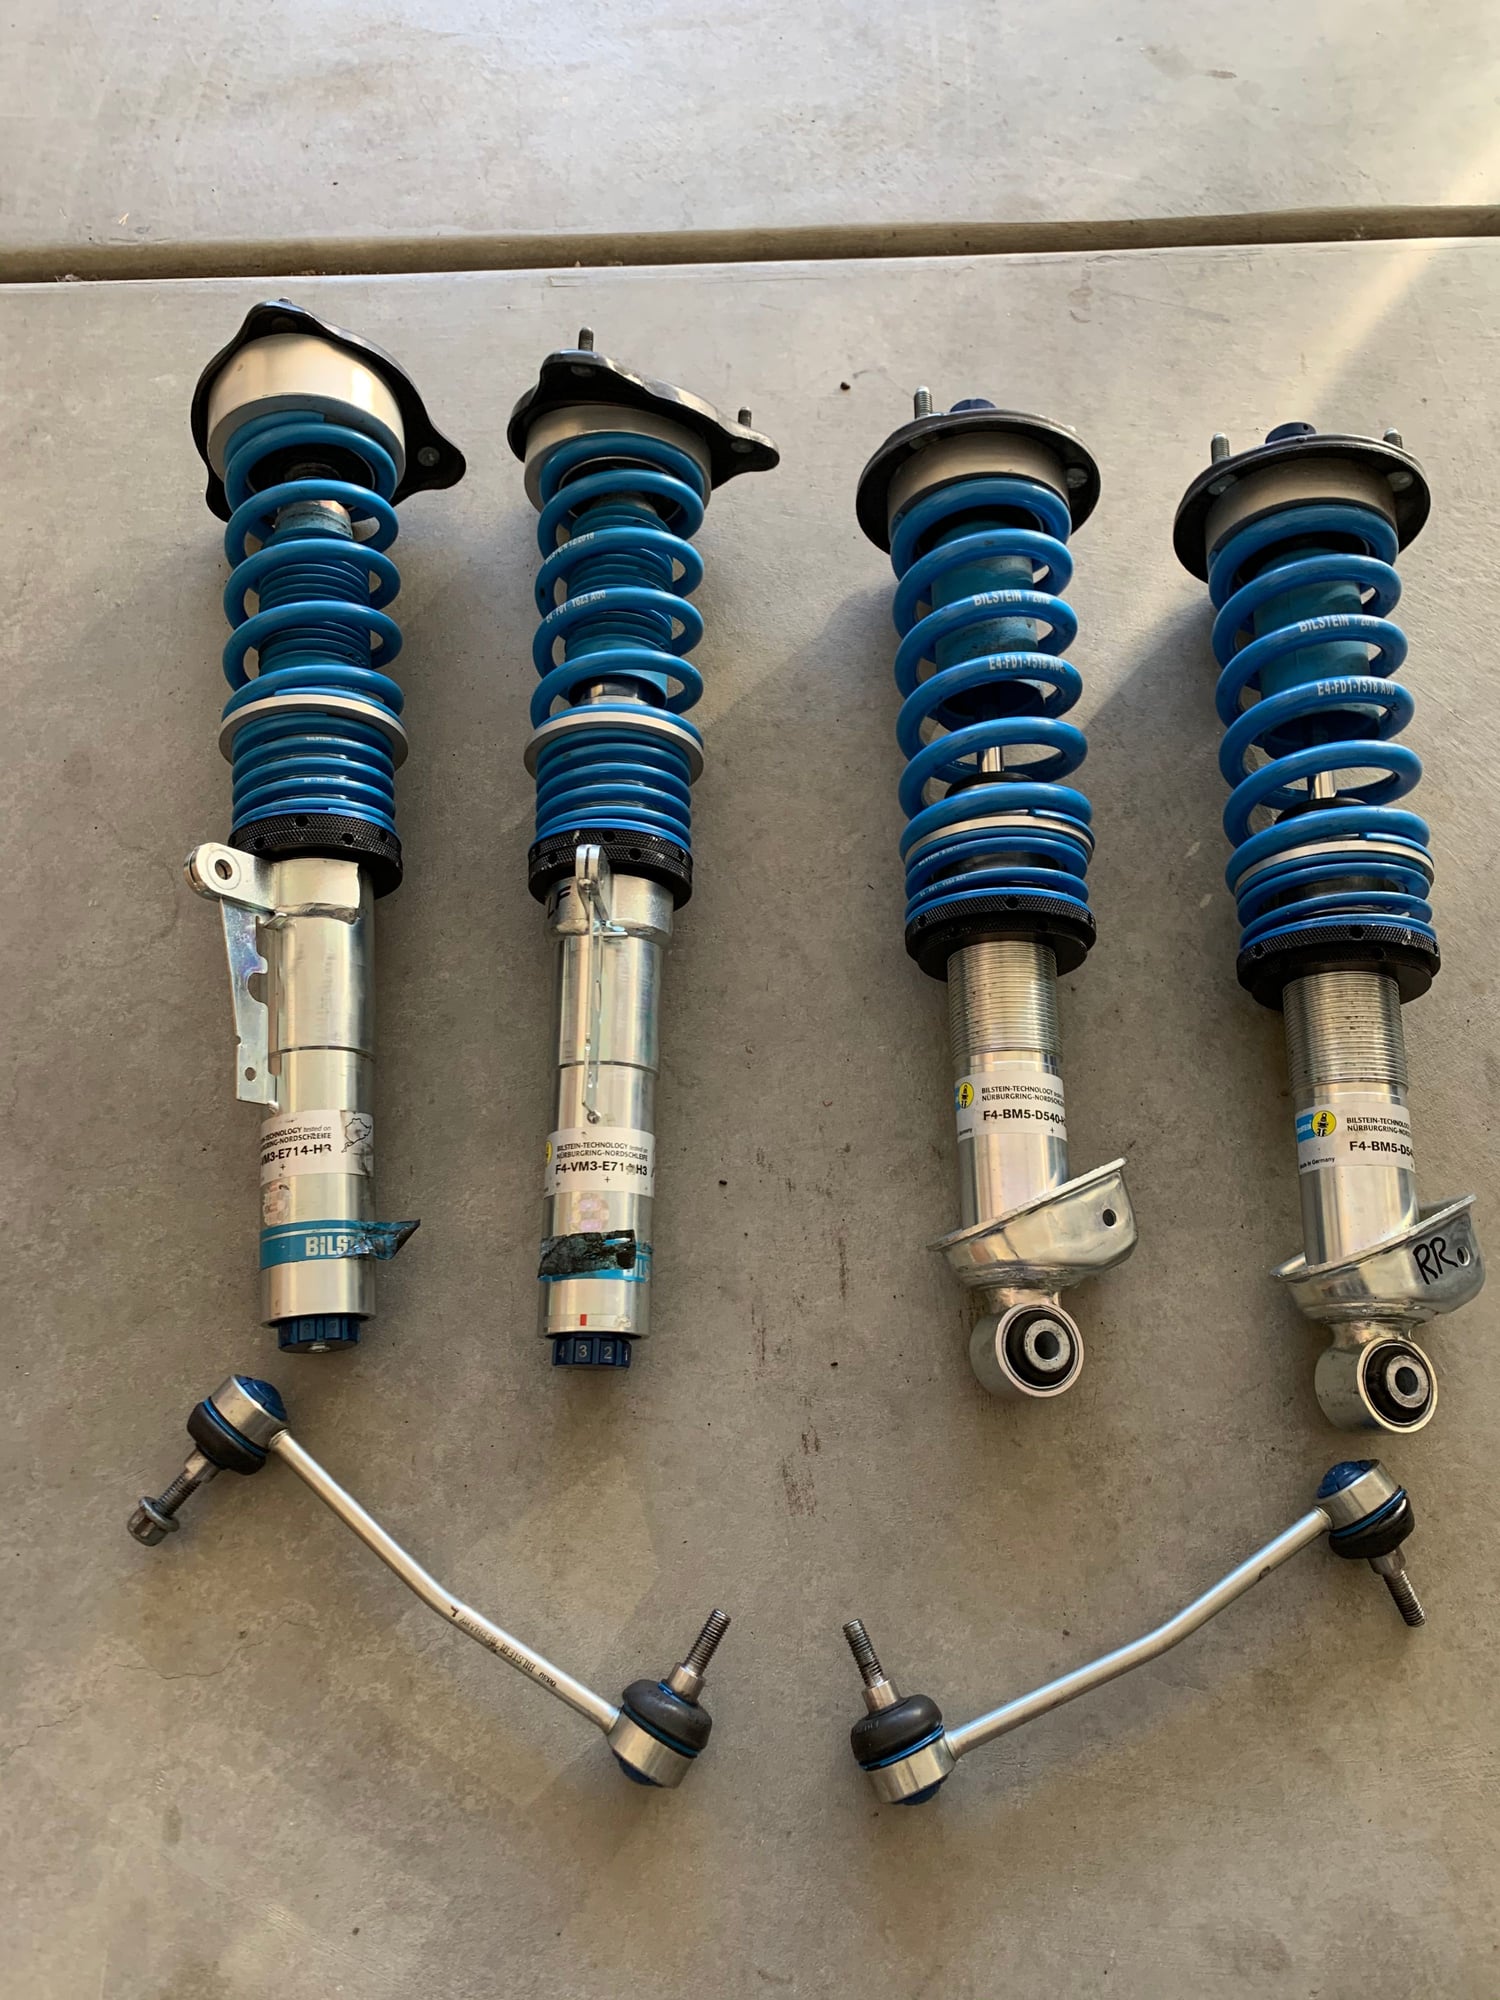 Steering/Suspension - For Sale Bilstein PSS10 coilover set up for 996 Turbo - Used - 2001 to 2004 Porsche 911 - Santa Clarita/los Angeles, CA 91350, United States